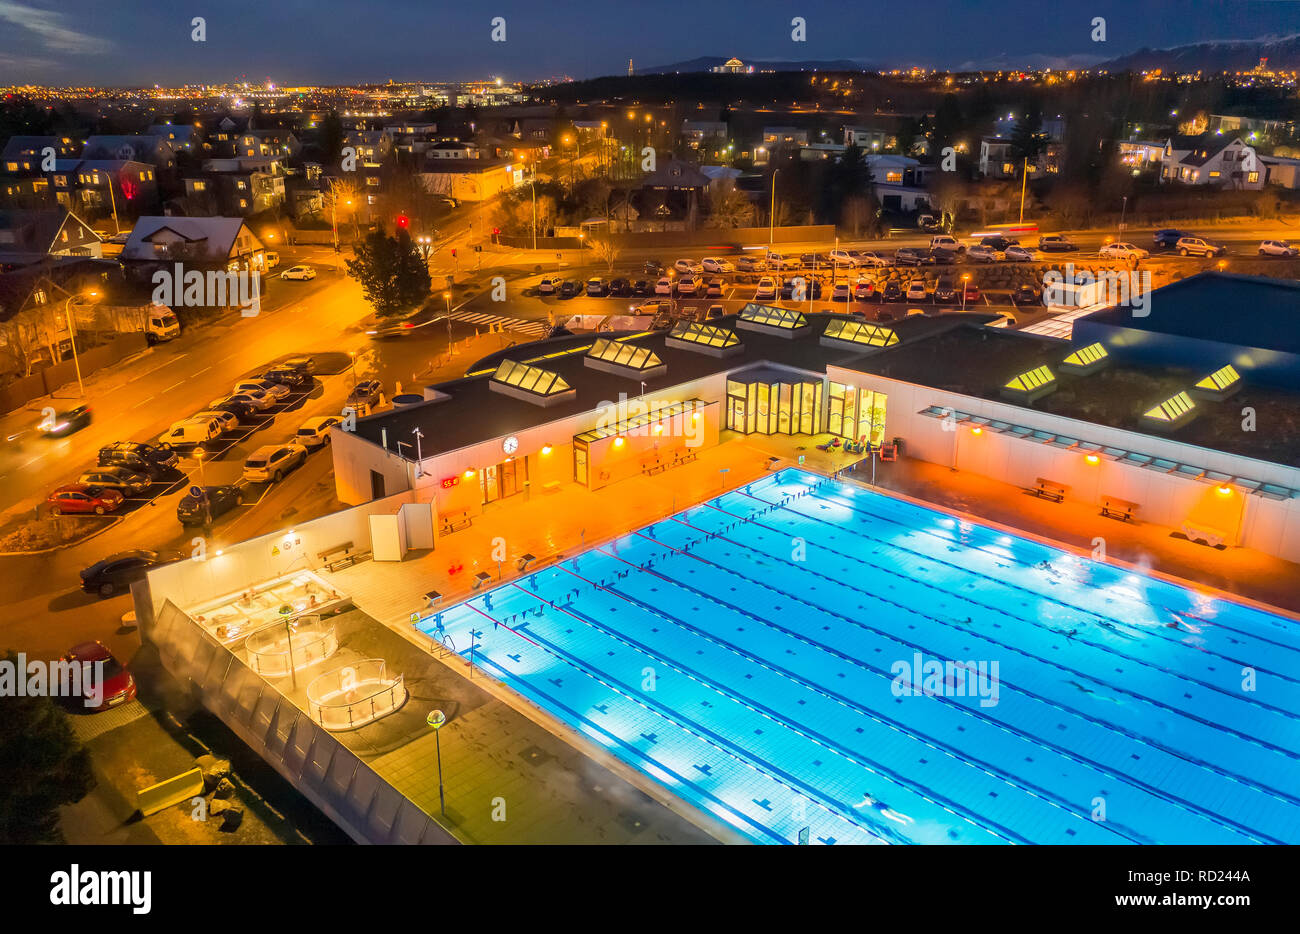 Swimming pool, Kopavogur, Iceland. Opened all year and heated with geothermal energy. Stock Photo